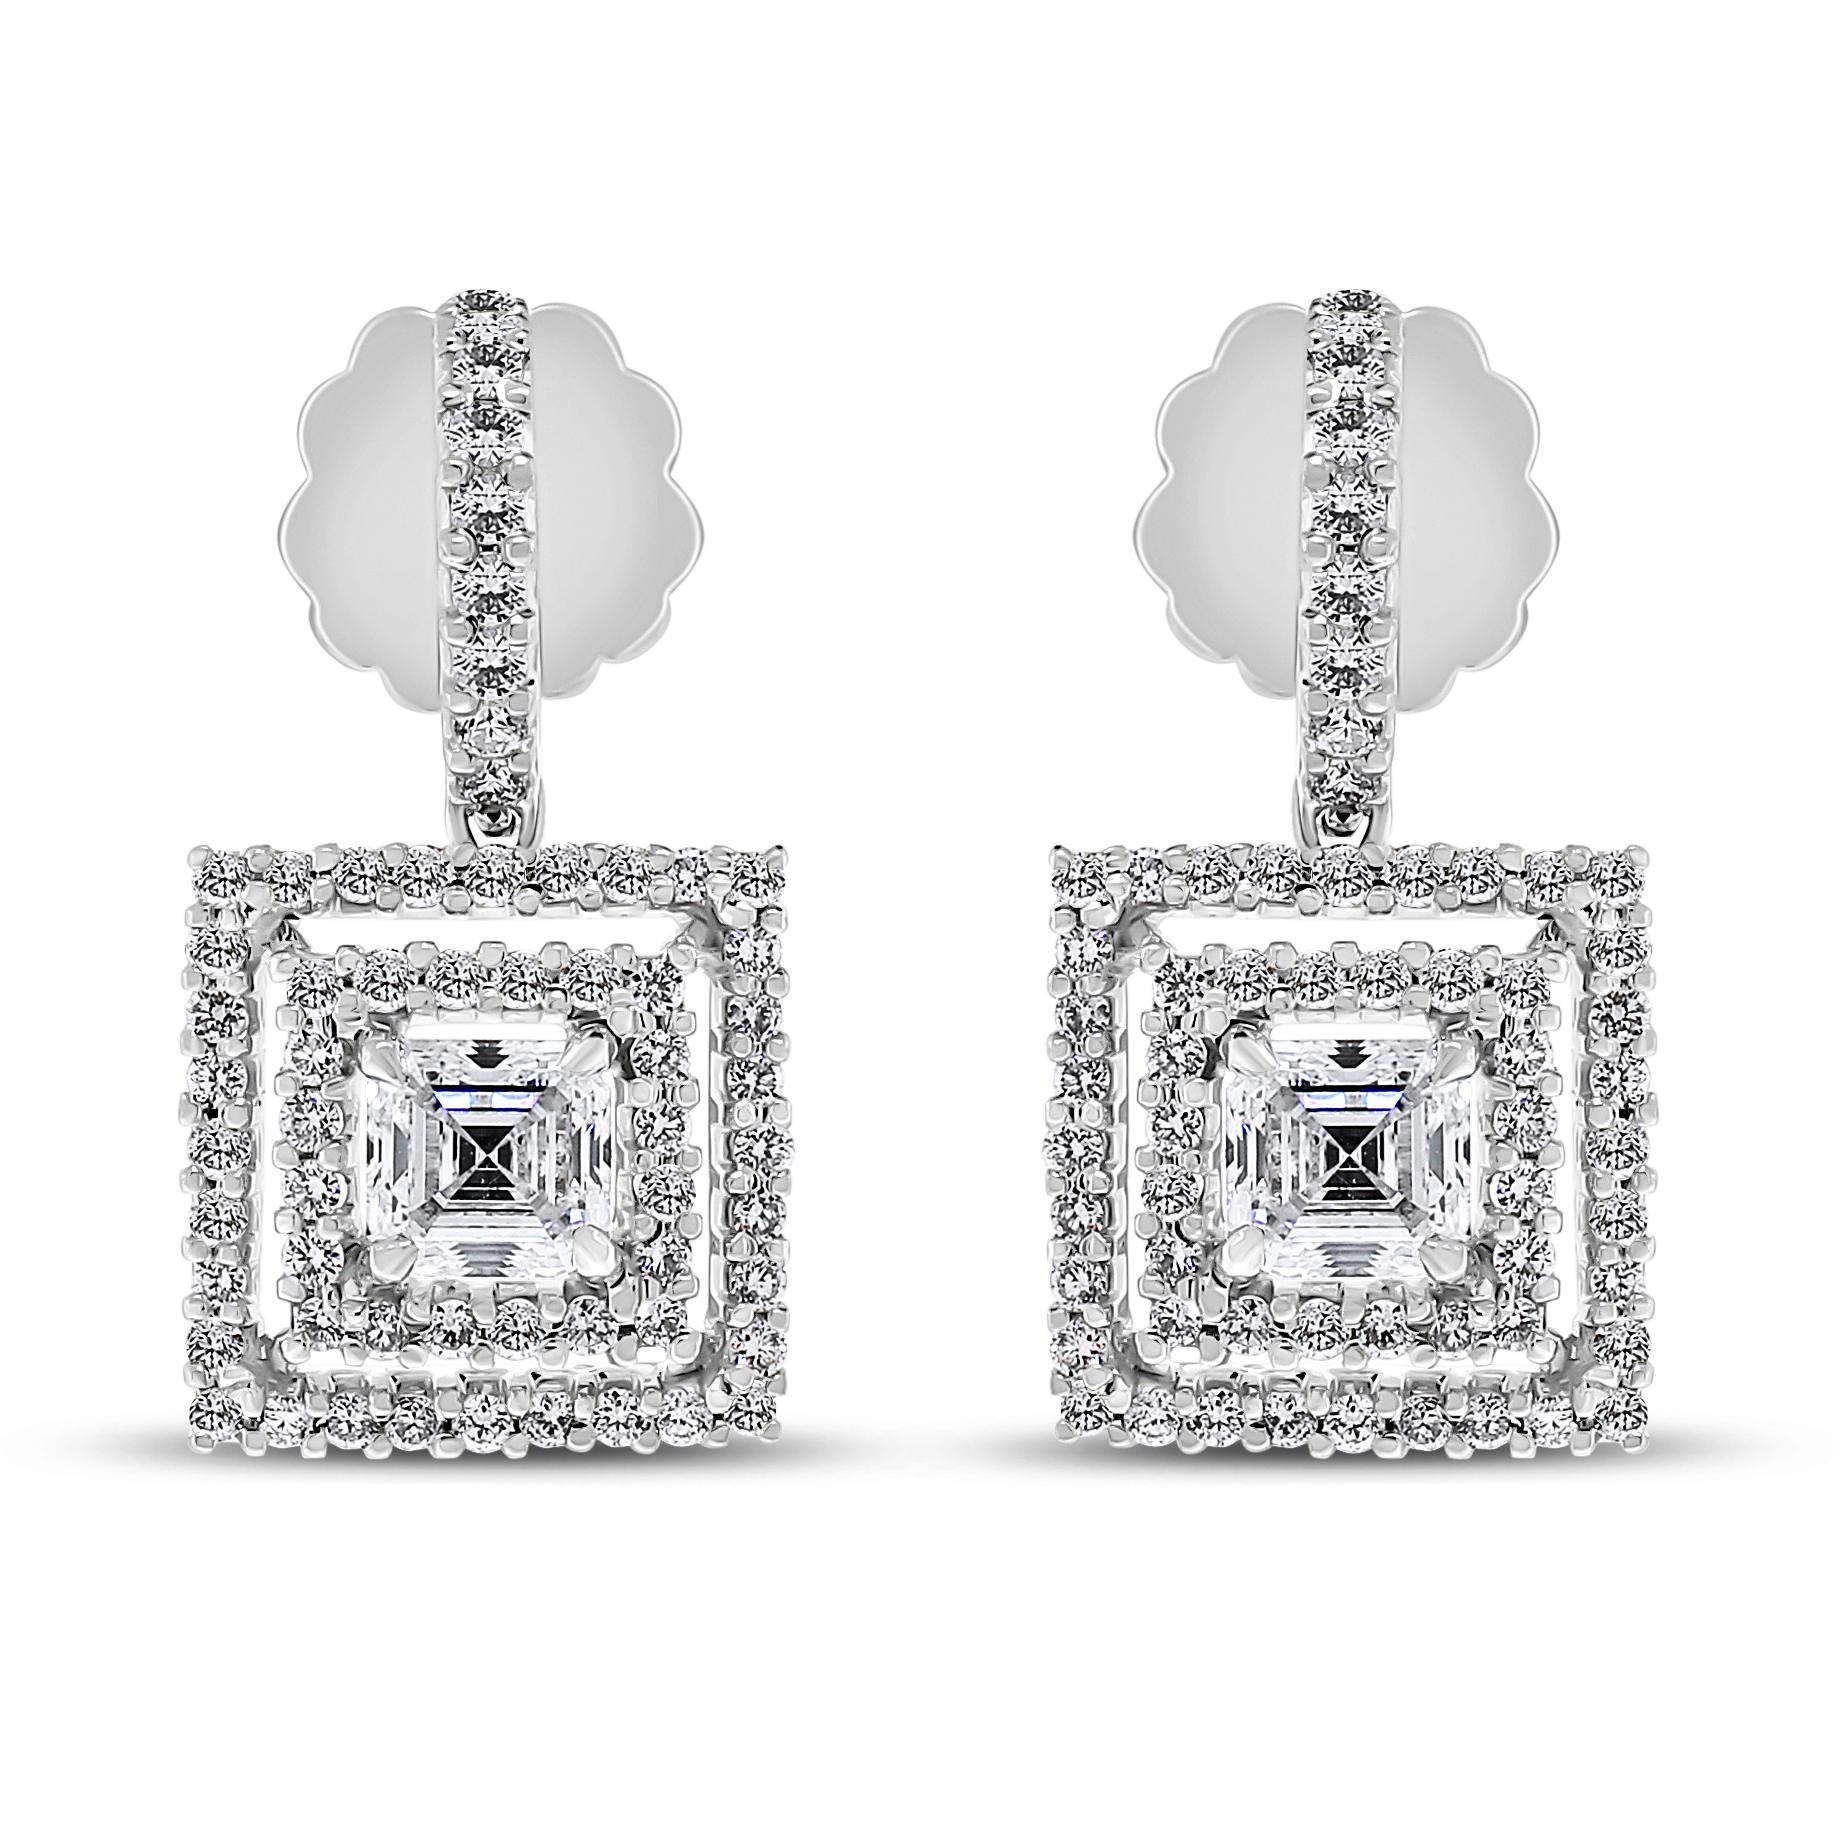 The Gatbsy Diamond Earrings & Pendant Set is bold and chic. With its strong lines and geometric shapes it stands out leaving the onlooker dazzled. 

Total Diamond Weight: 3.89 ct (2.22 ct Asscher Cut + 1.67 ct Round Diamonds) 
Diamond Color: G -